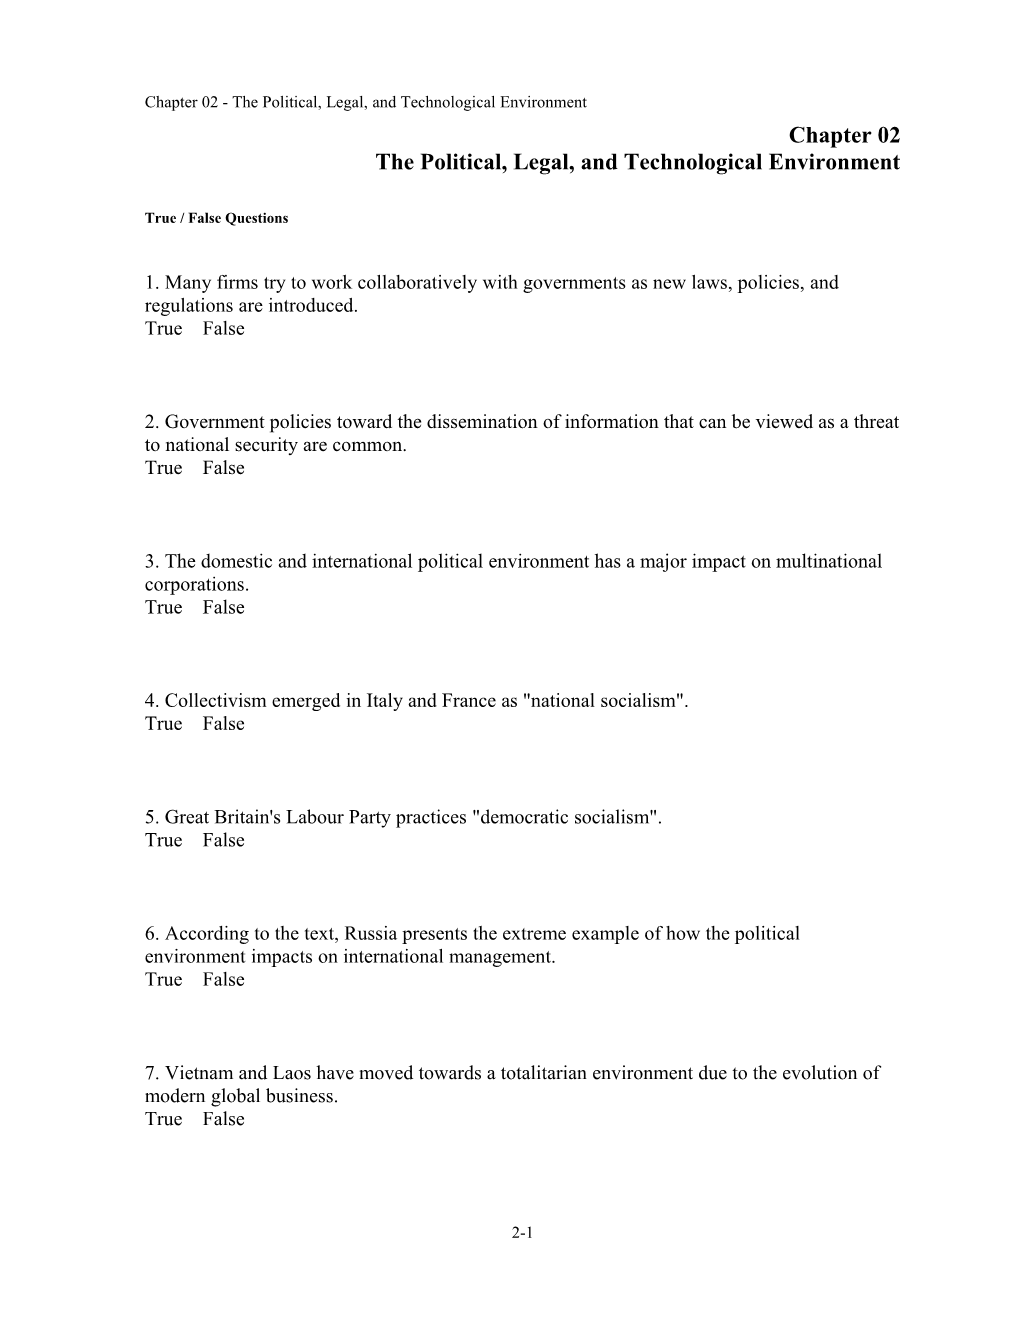 Chapter 02 the Political, Legal, and Technological Environment